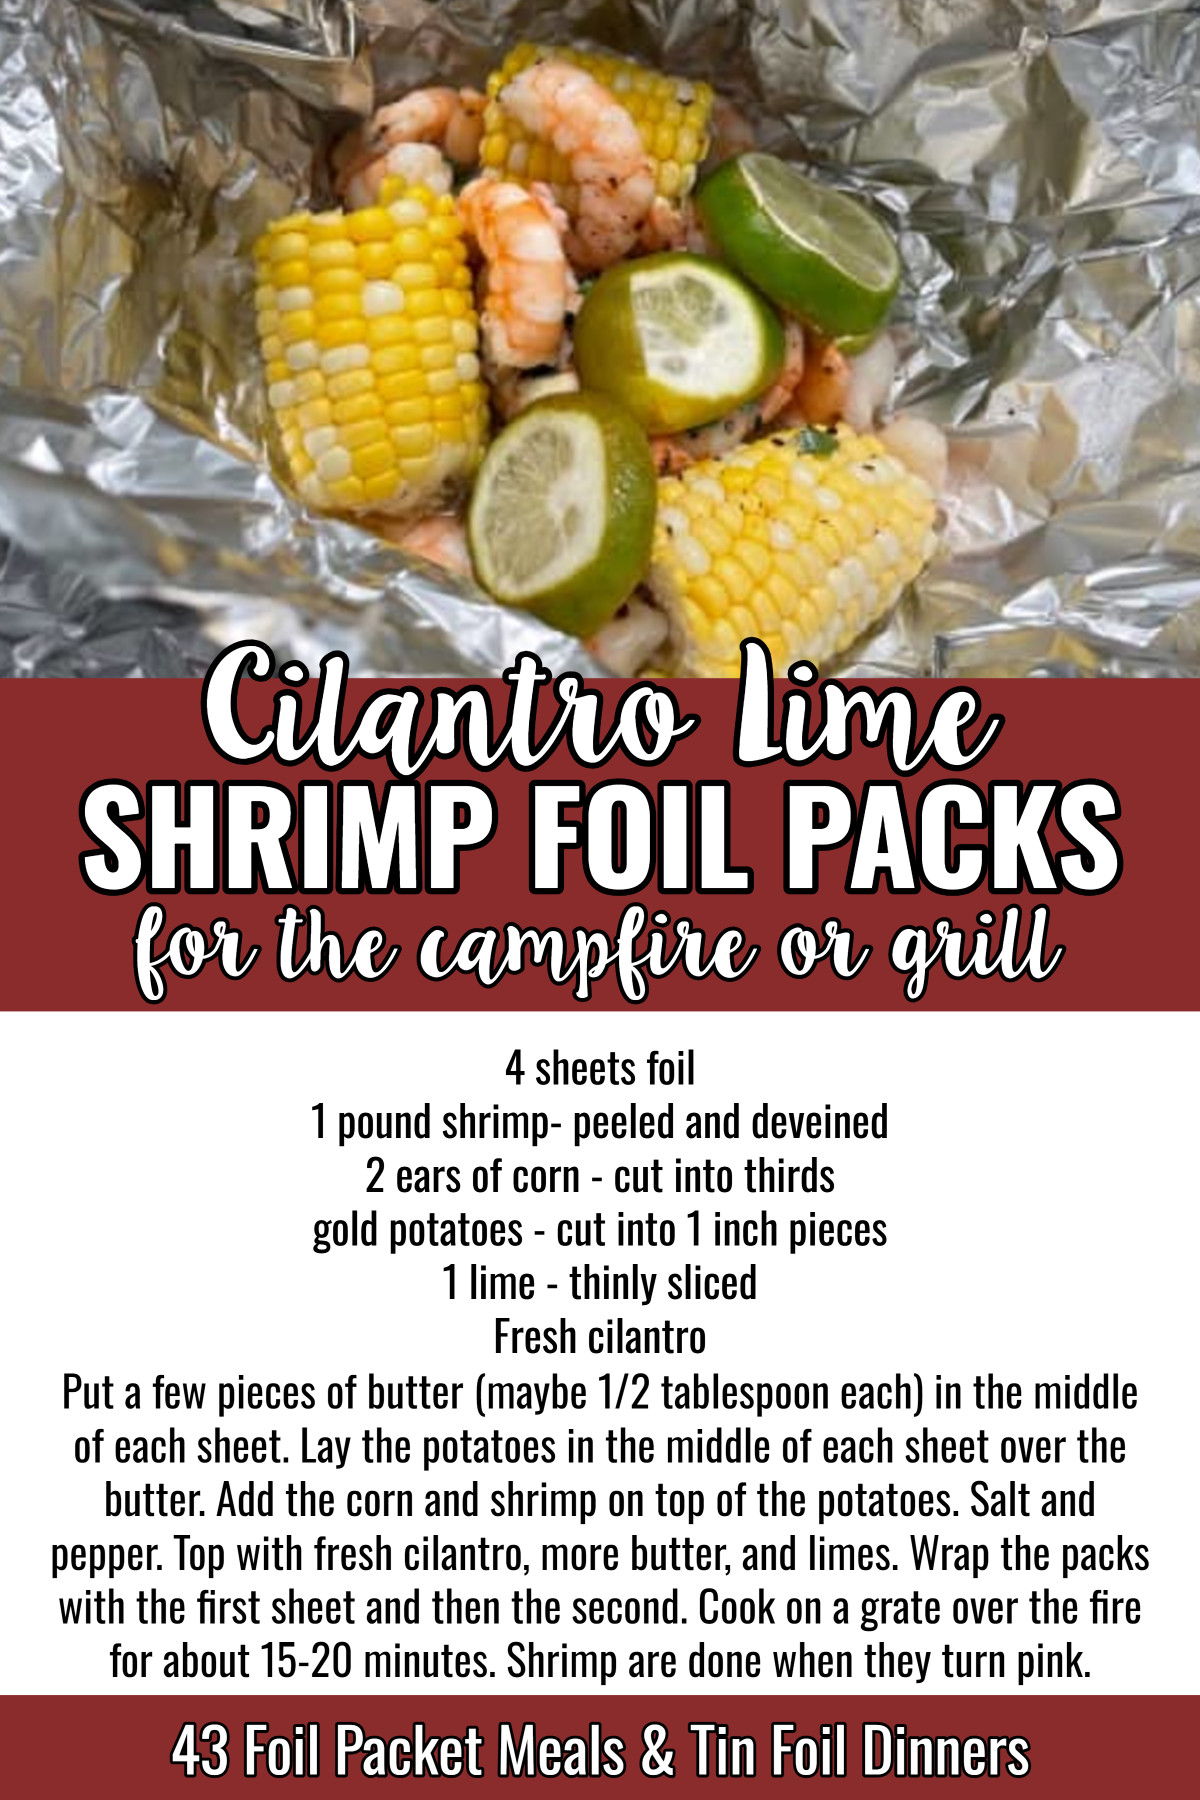 Cilantro Lime Shrimp Foil Packs For The Campfire Or Grill